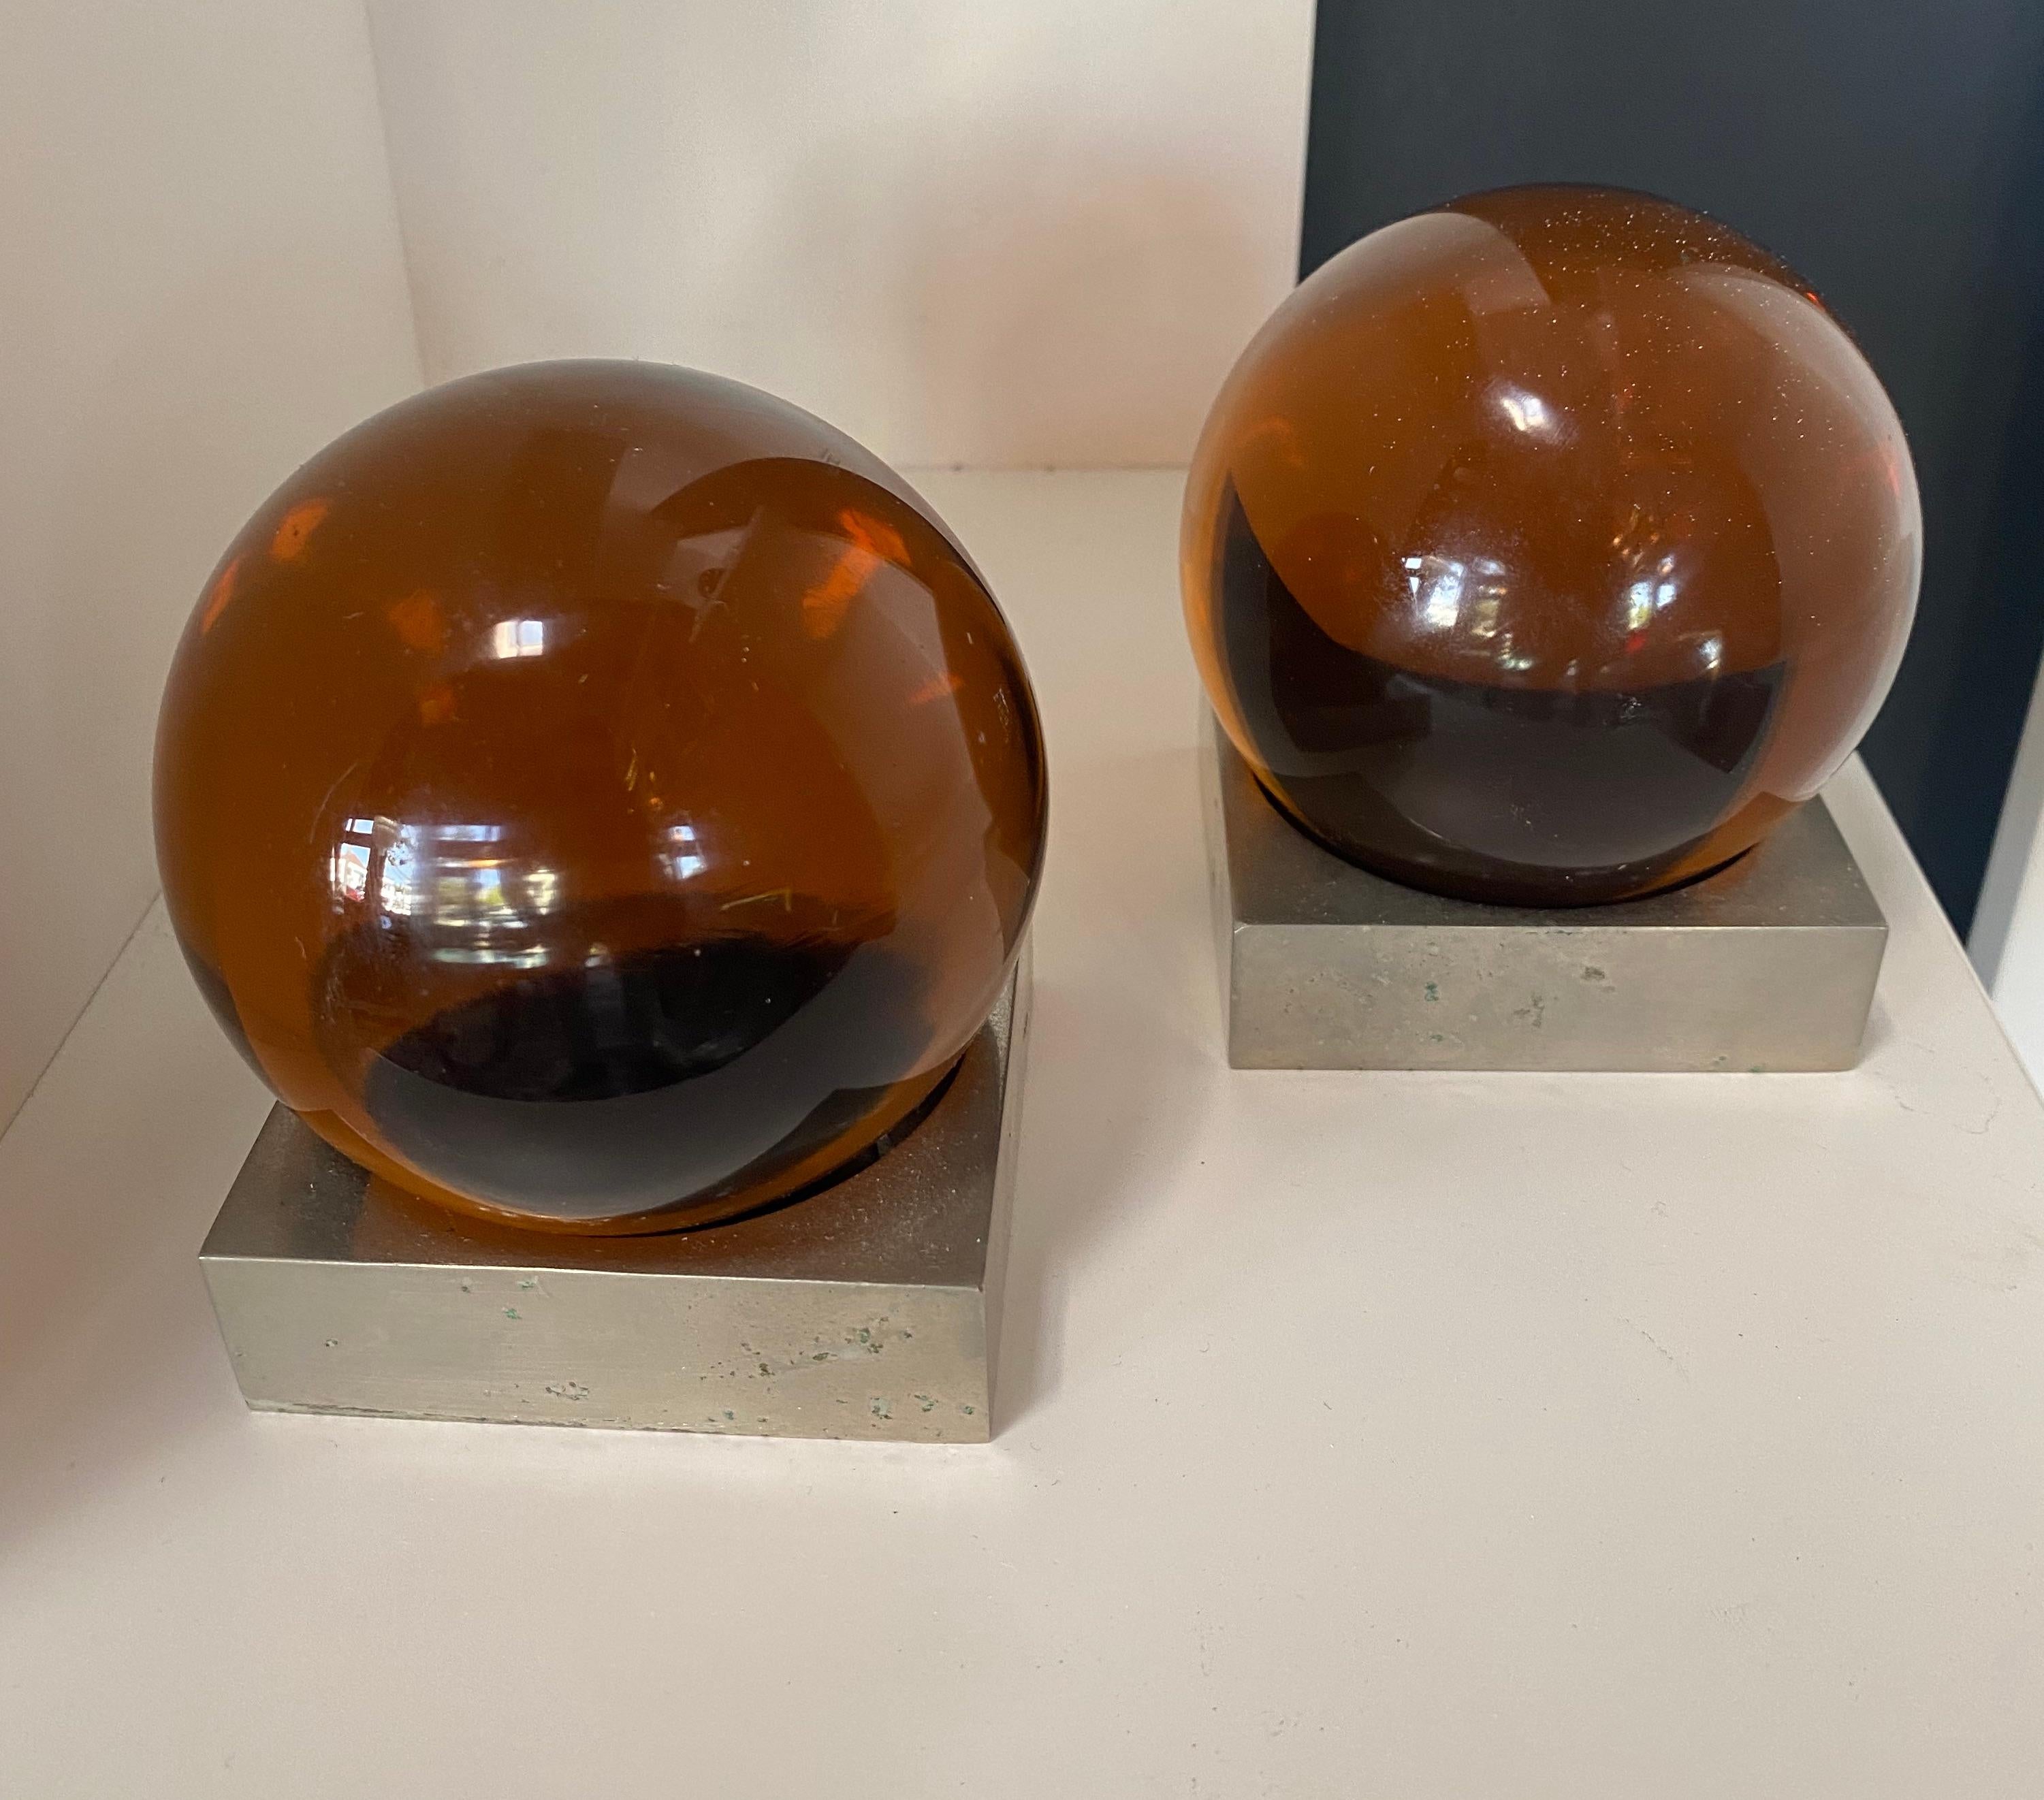 Pair of 2 vintage Italian paper weight
Each piece is in a way unique and handcrafted in Italy. Slight variations in shape, color and size are to be considered a guarantee of a handcrafted creation.